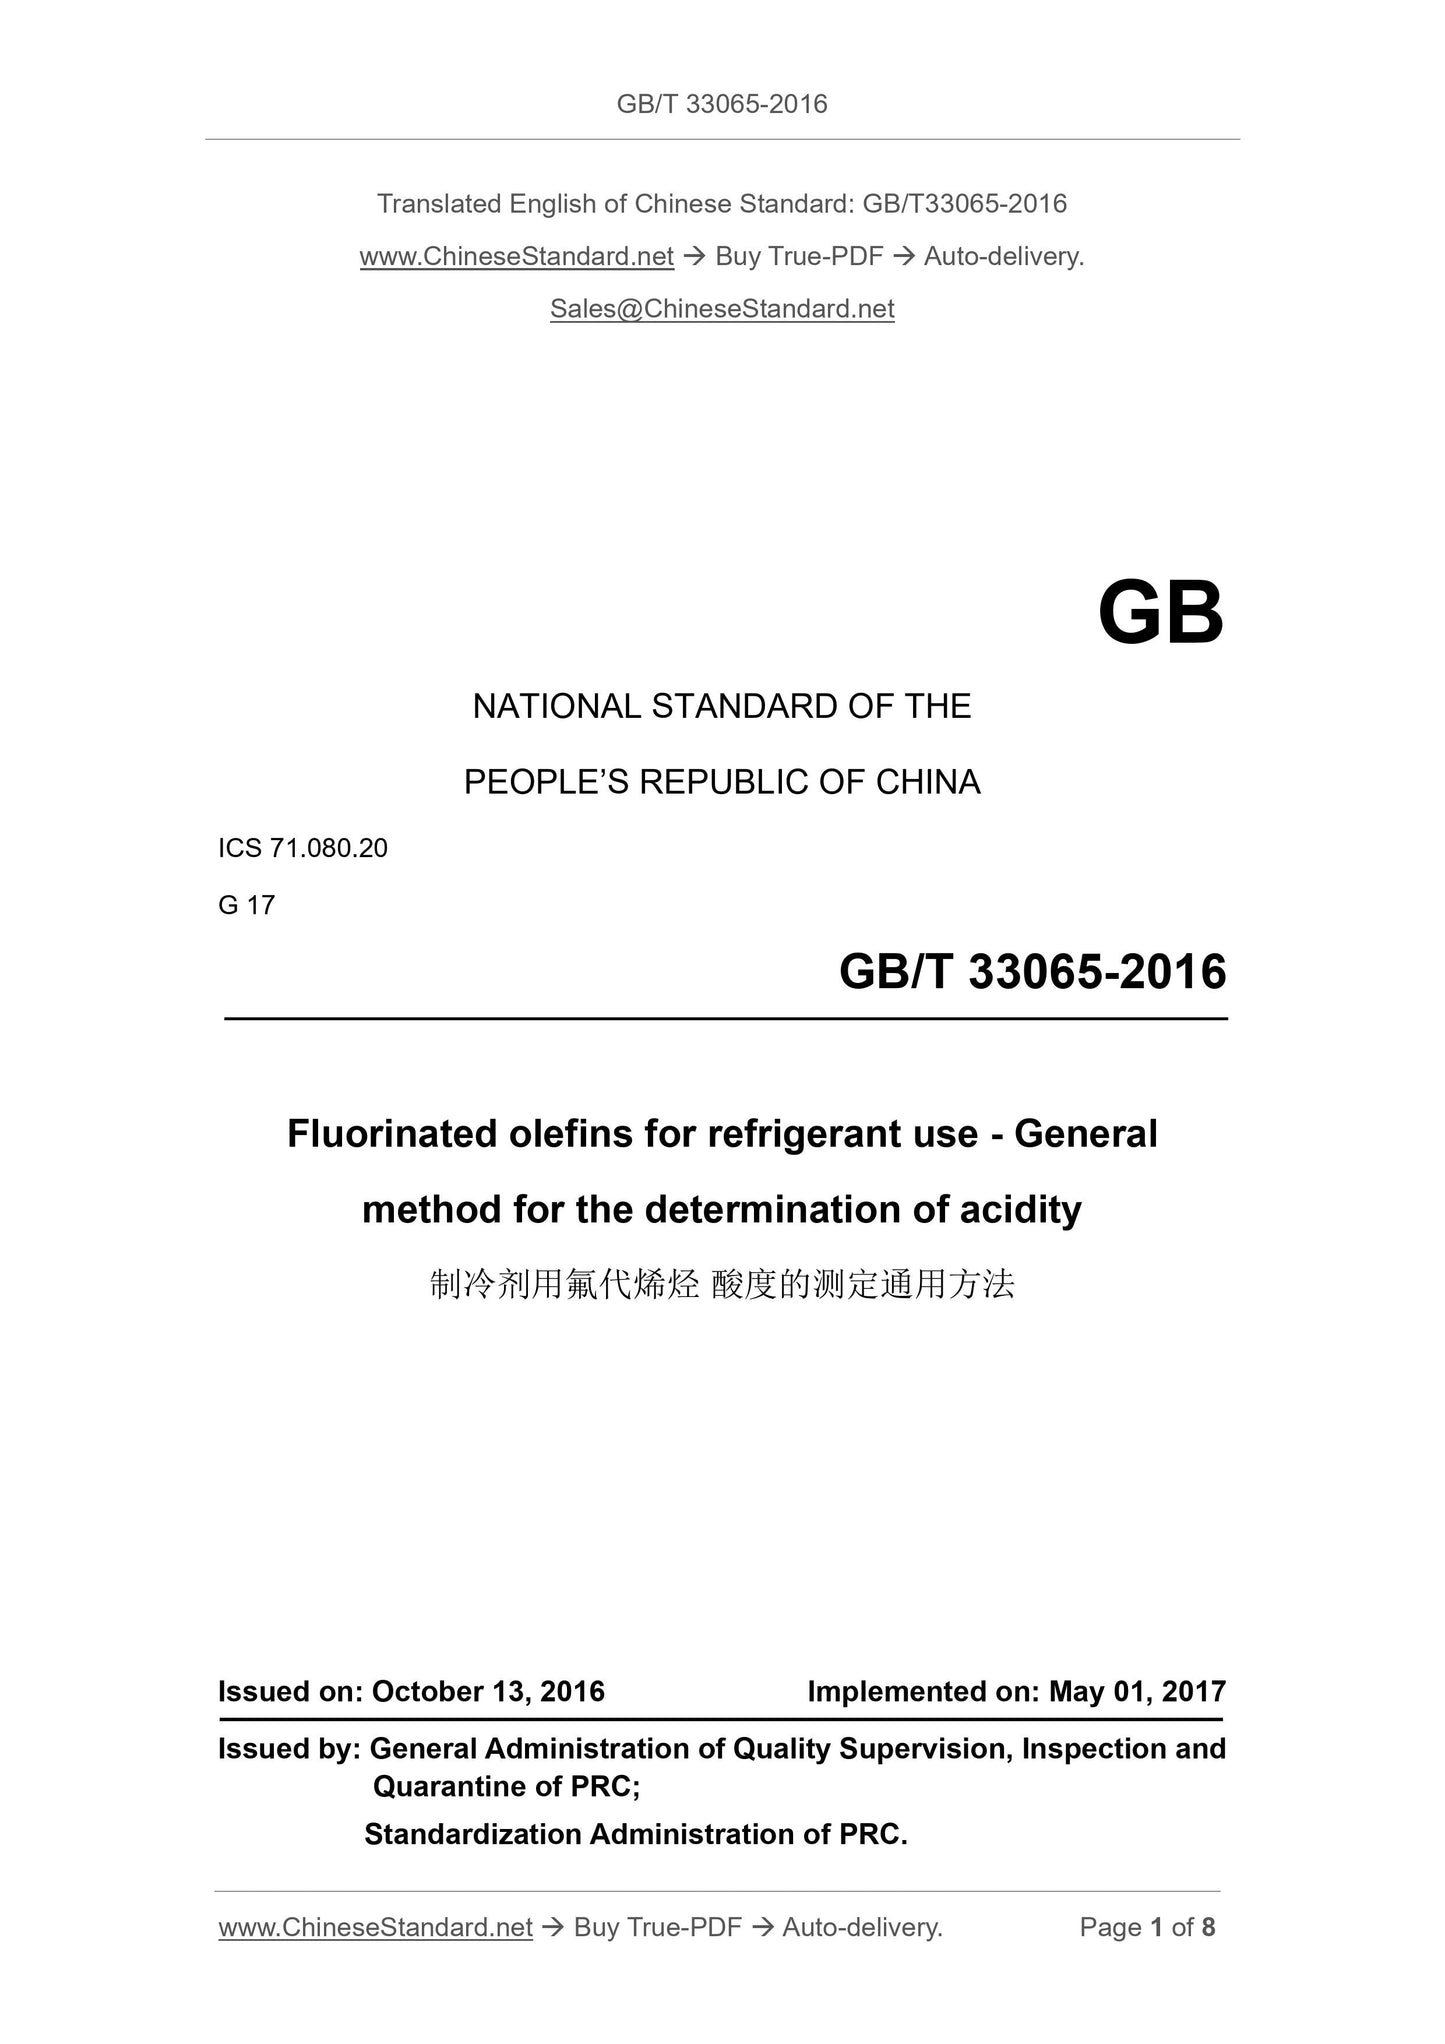 GB/T 33065-2016 Page 1